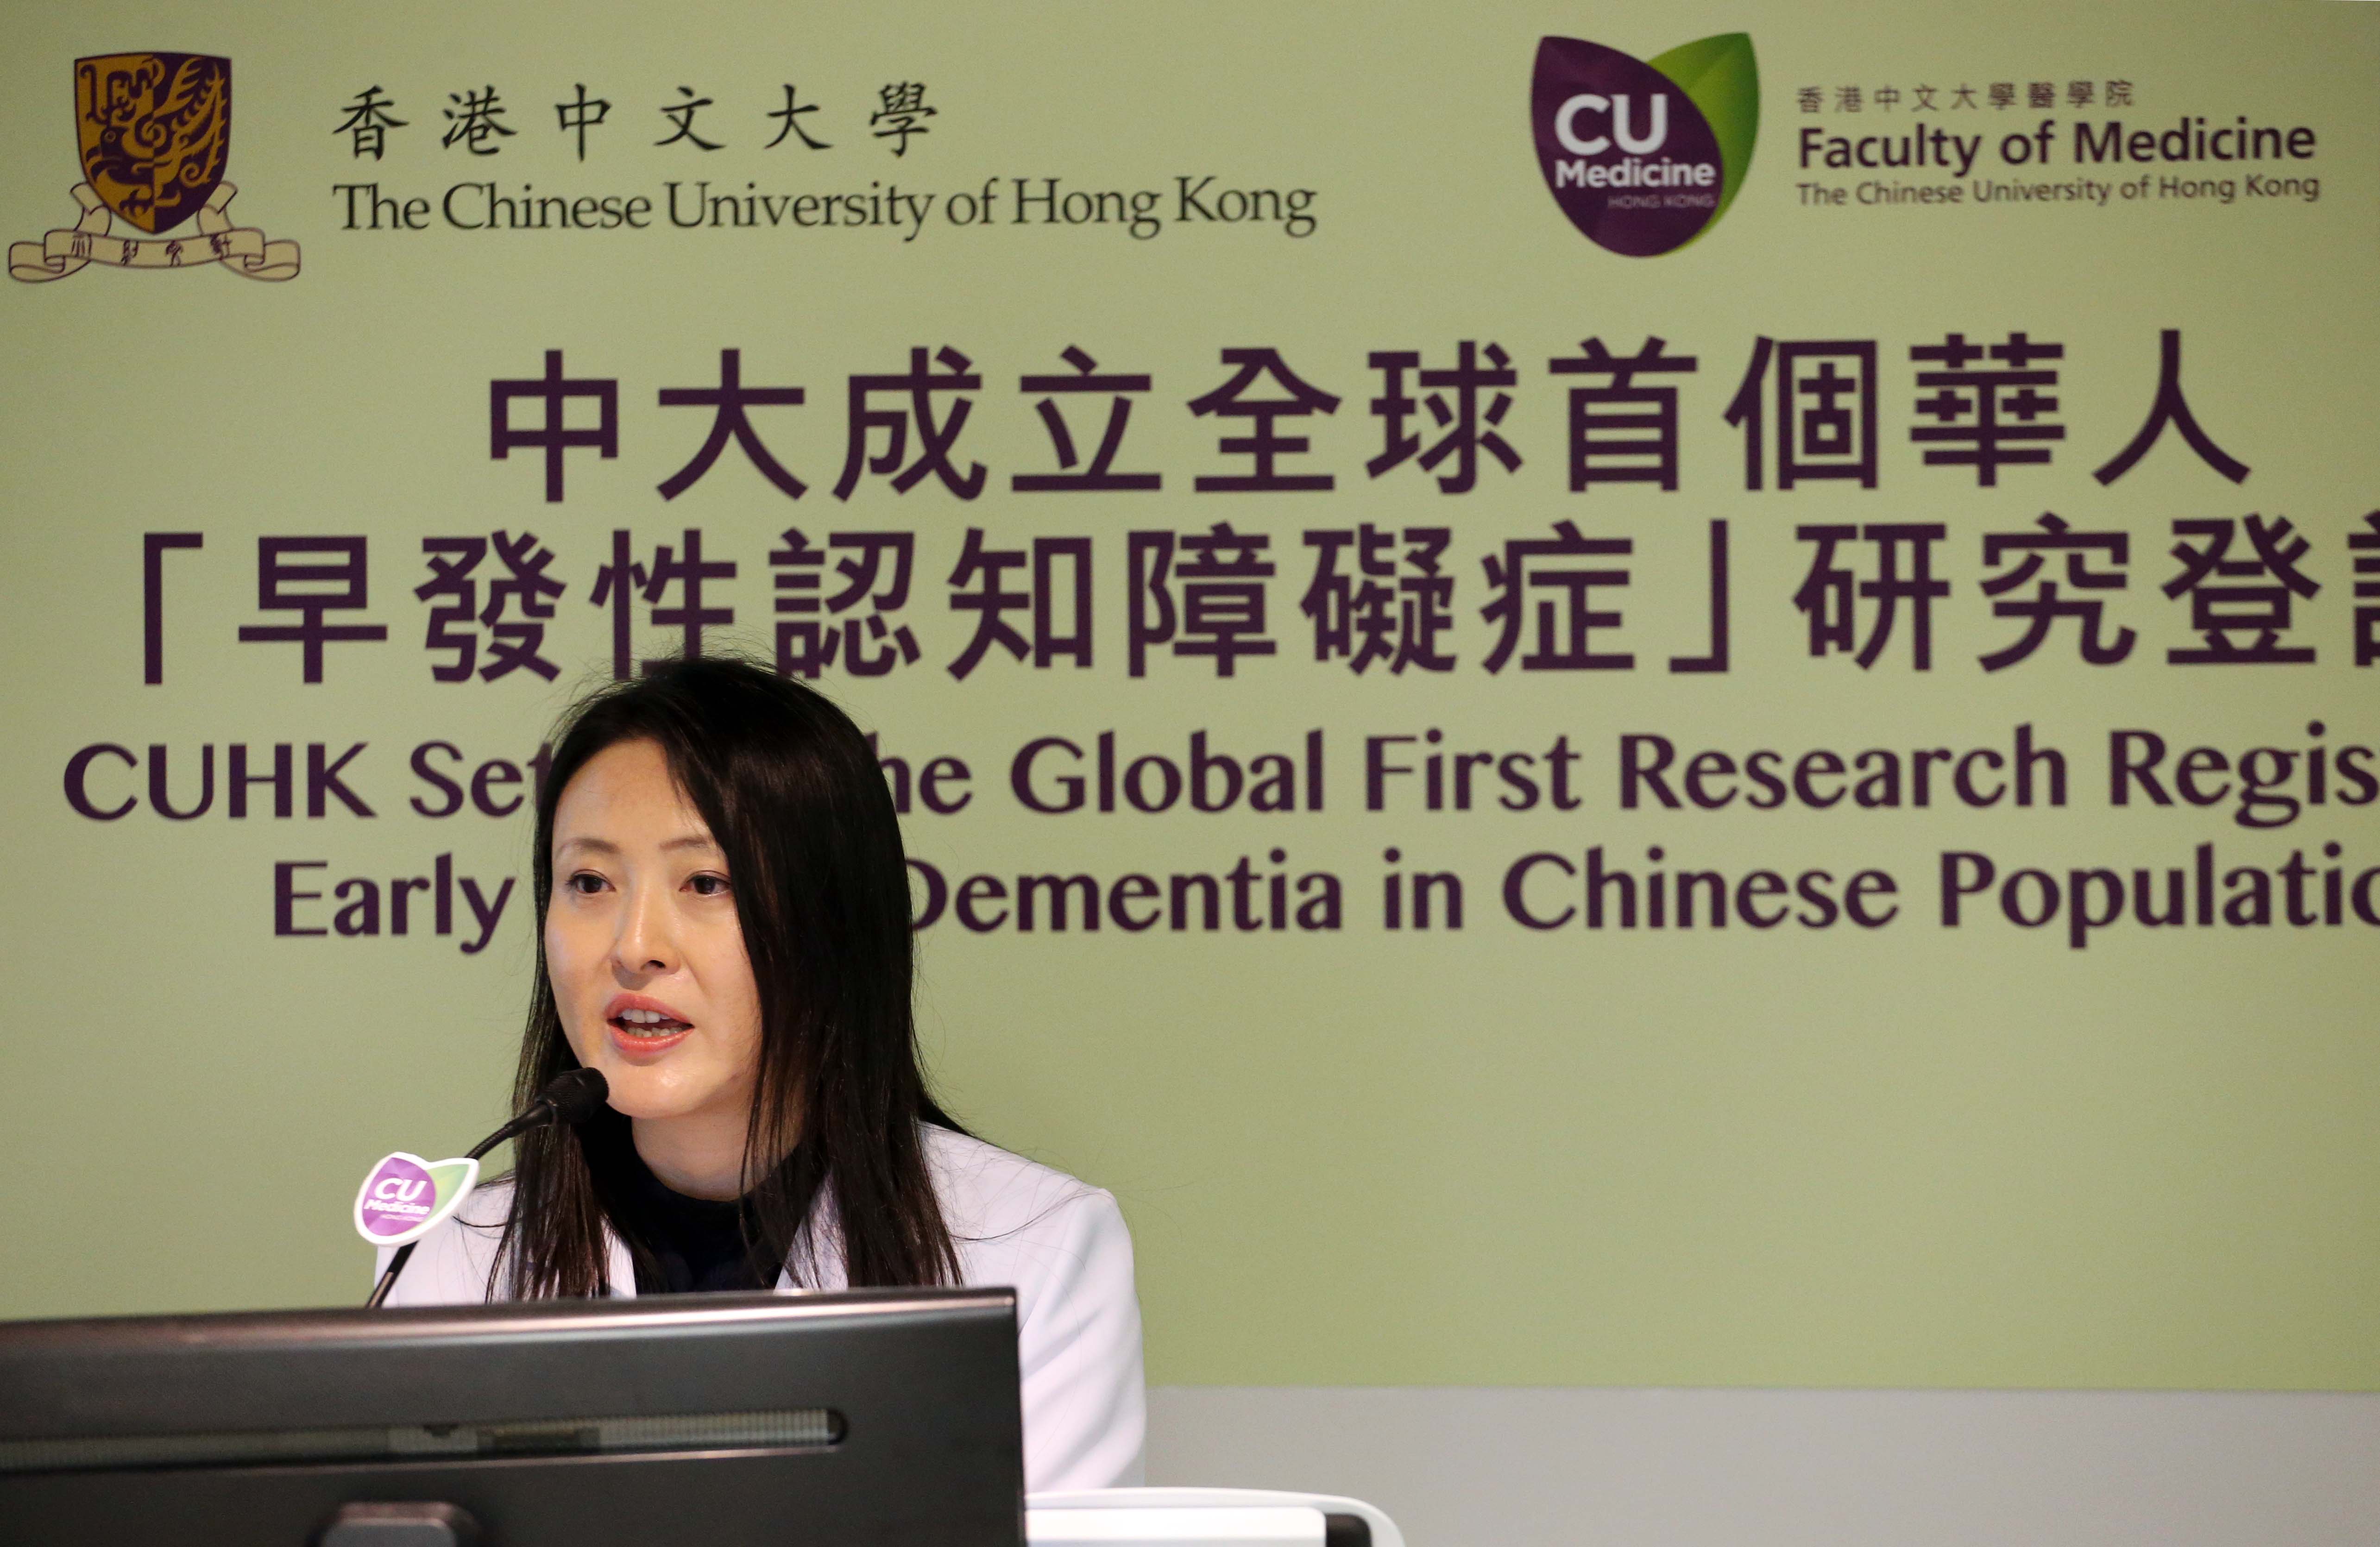 Prof. Winnie Chiu Wing CHU, Department of Imaging & Interventional Radiology, Faculty of Medicine explained the research team has applied a new advanced MRI technique - Arterial Spin Labelling (MRI-ASL) and found that it may be useful in the early detection of FTLD. The technique offers the possibility of capturing functional and structural changes in the brain in a single study.